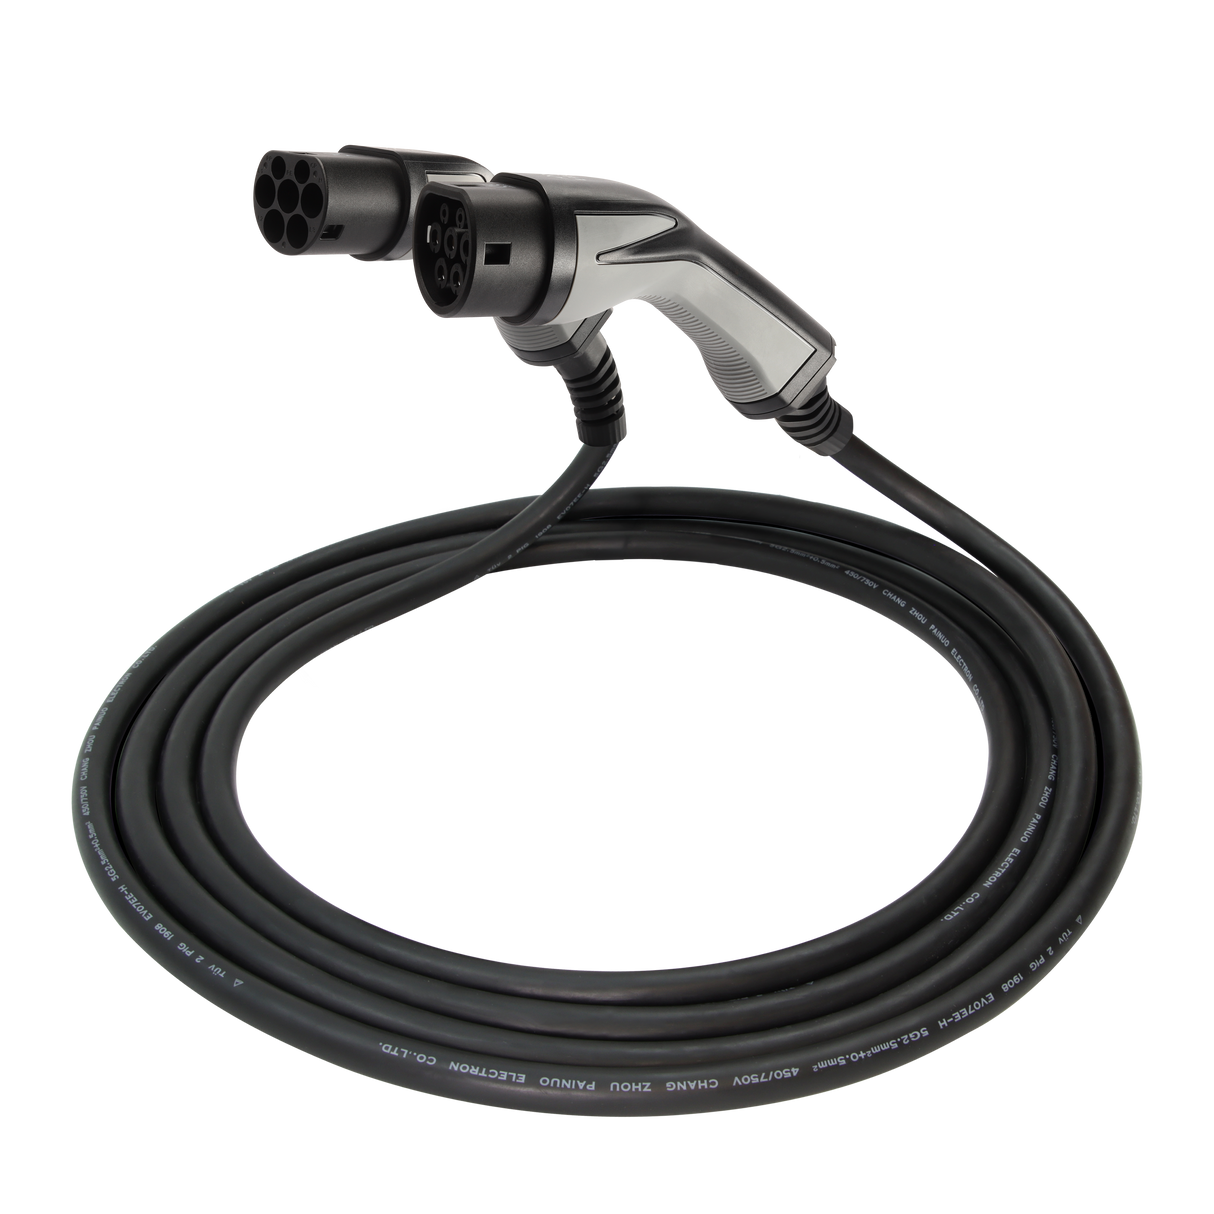 Charging cable Citroen C5 Aircross - Erock Pro Type 2 - 16A 1 phase (3.7 kW)